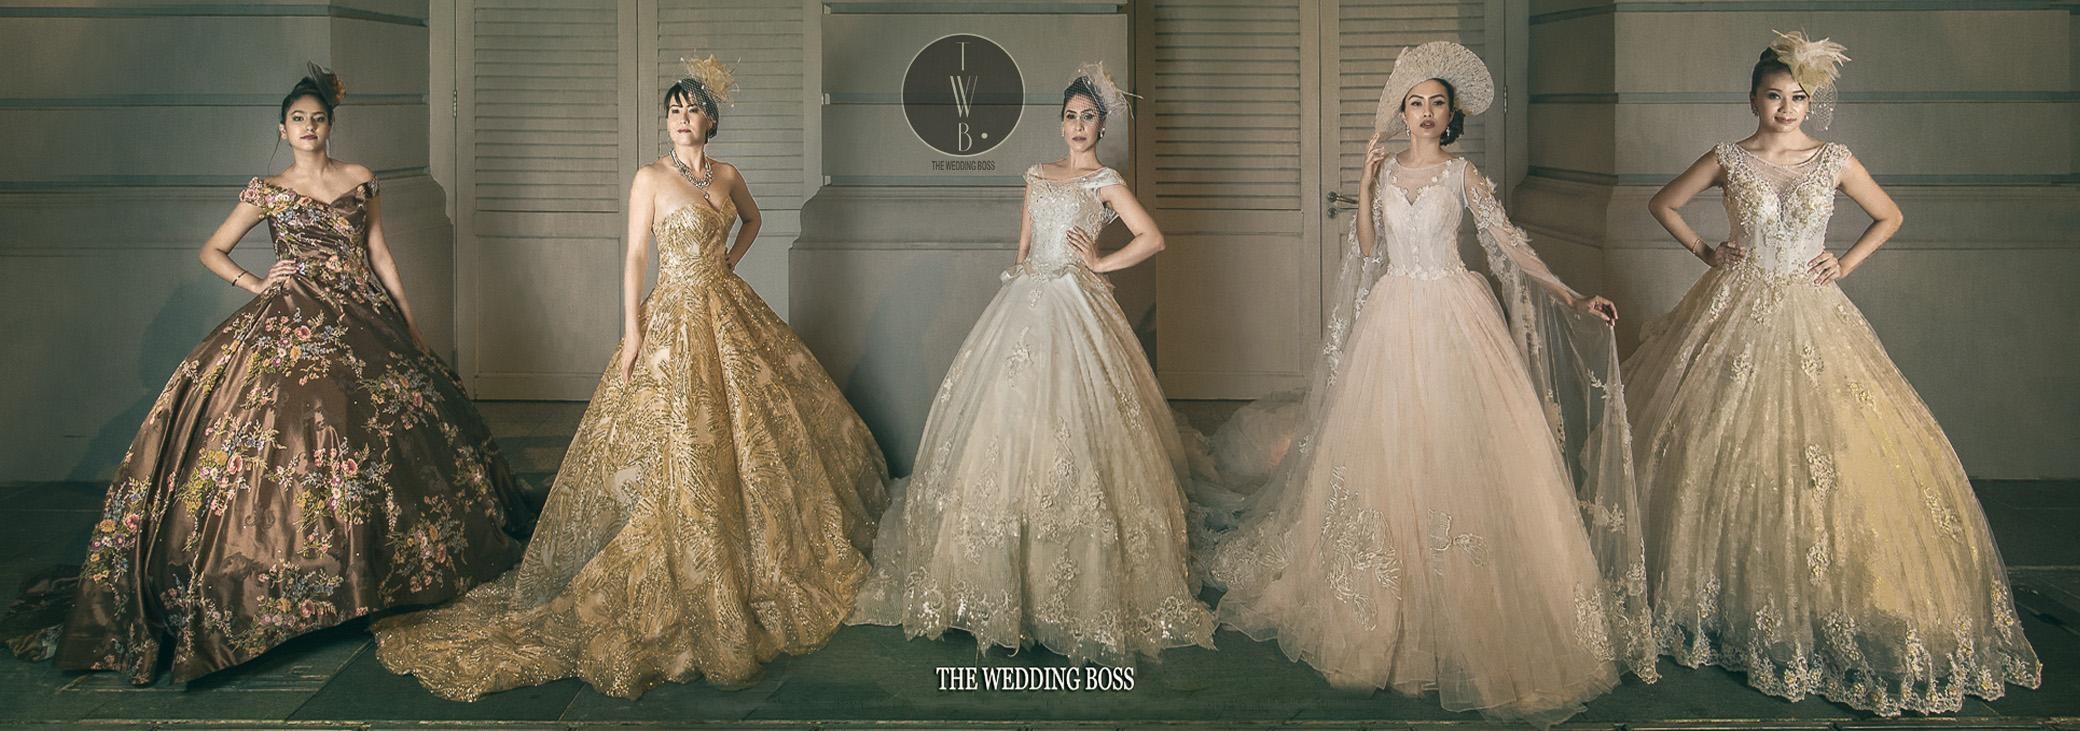 A Wedding Like No Other | The Wedding Boss